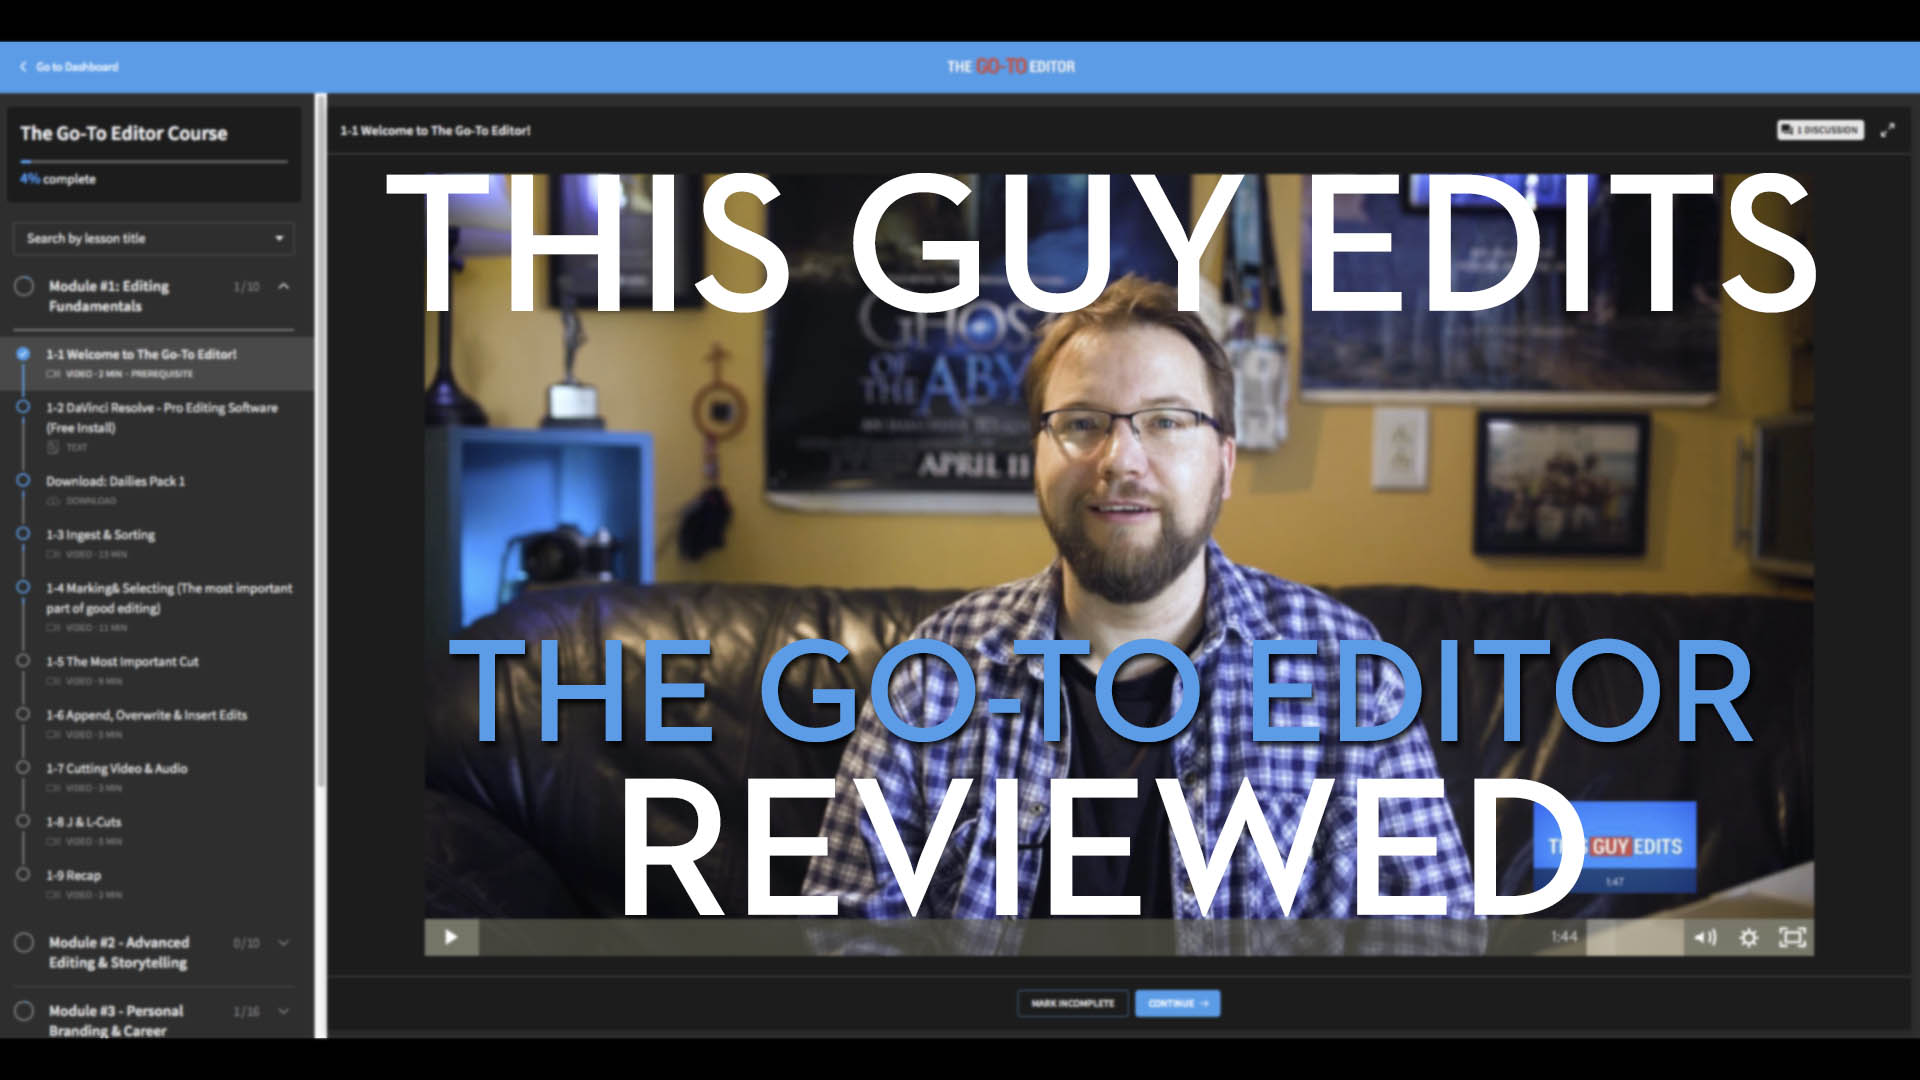 This Guy Edits Editing course review